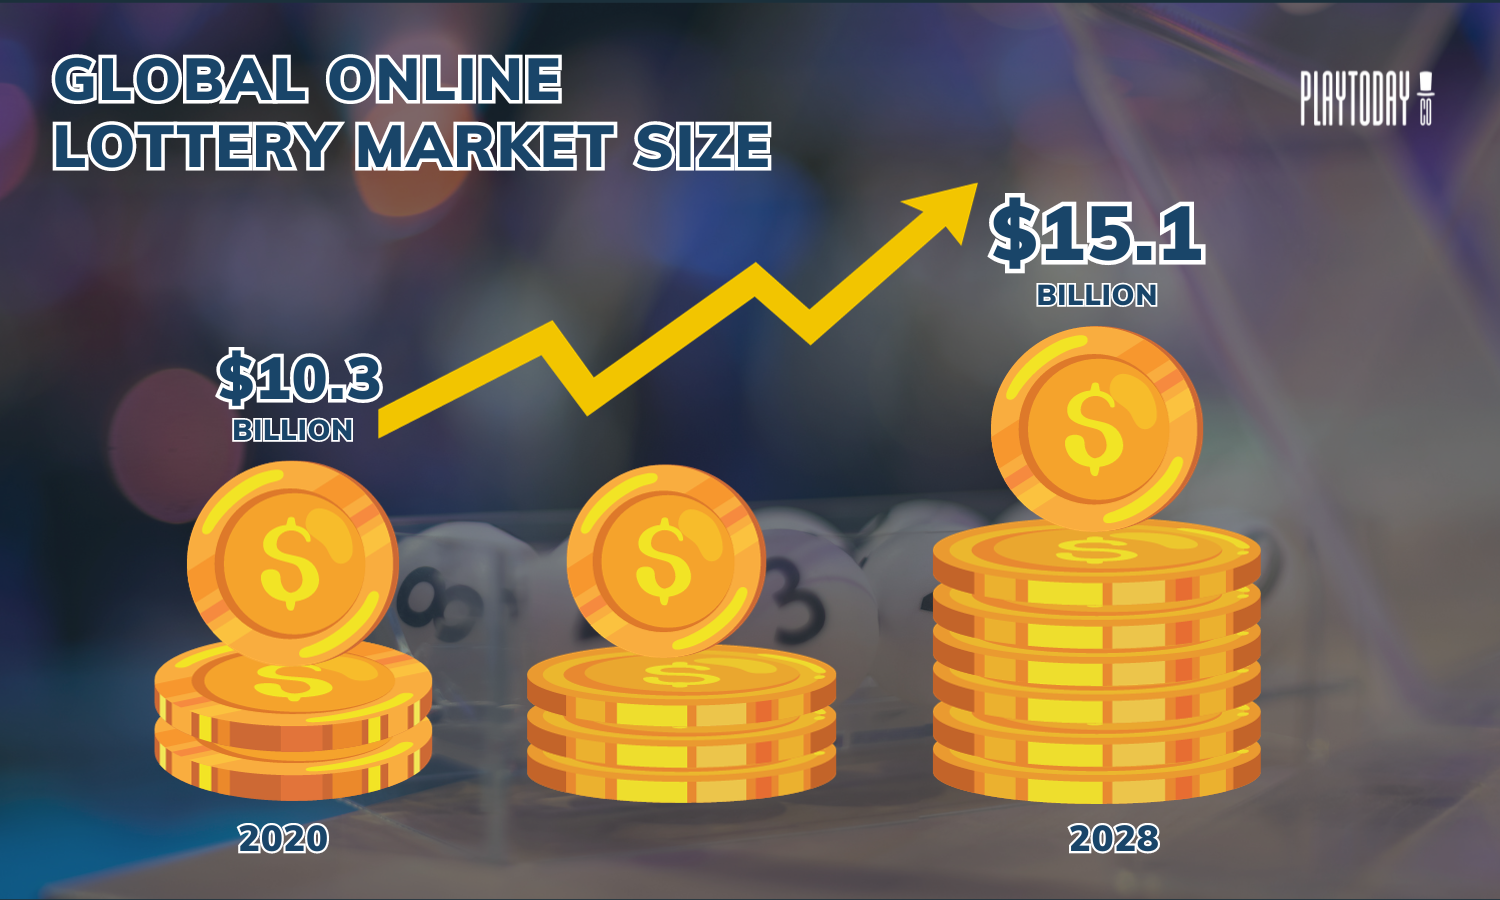 The global online Lottery market size growth